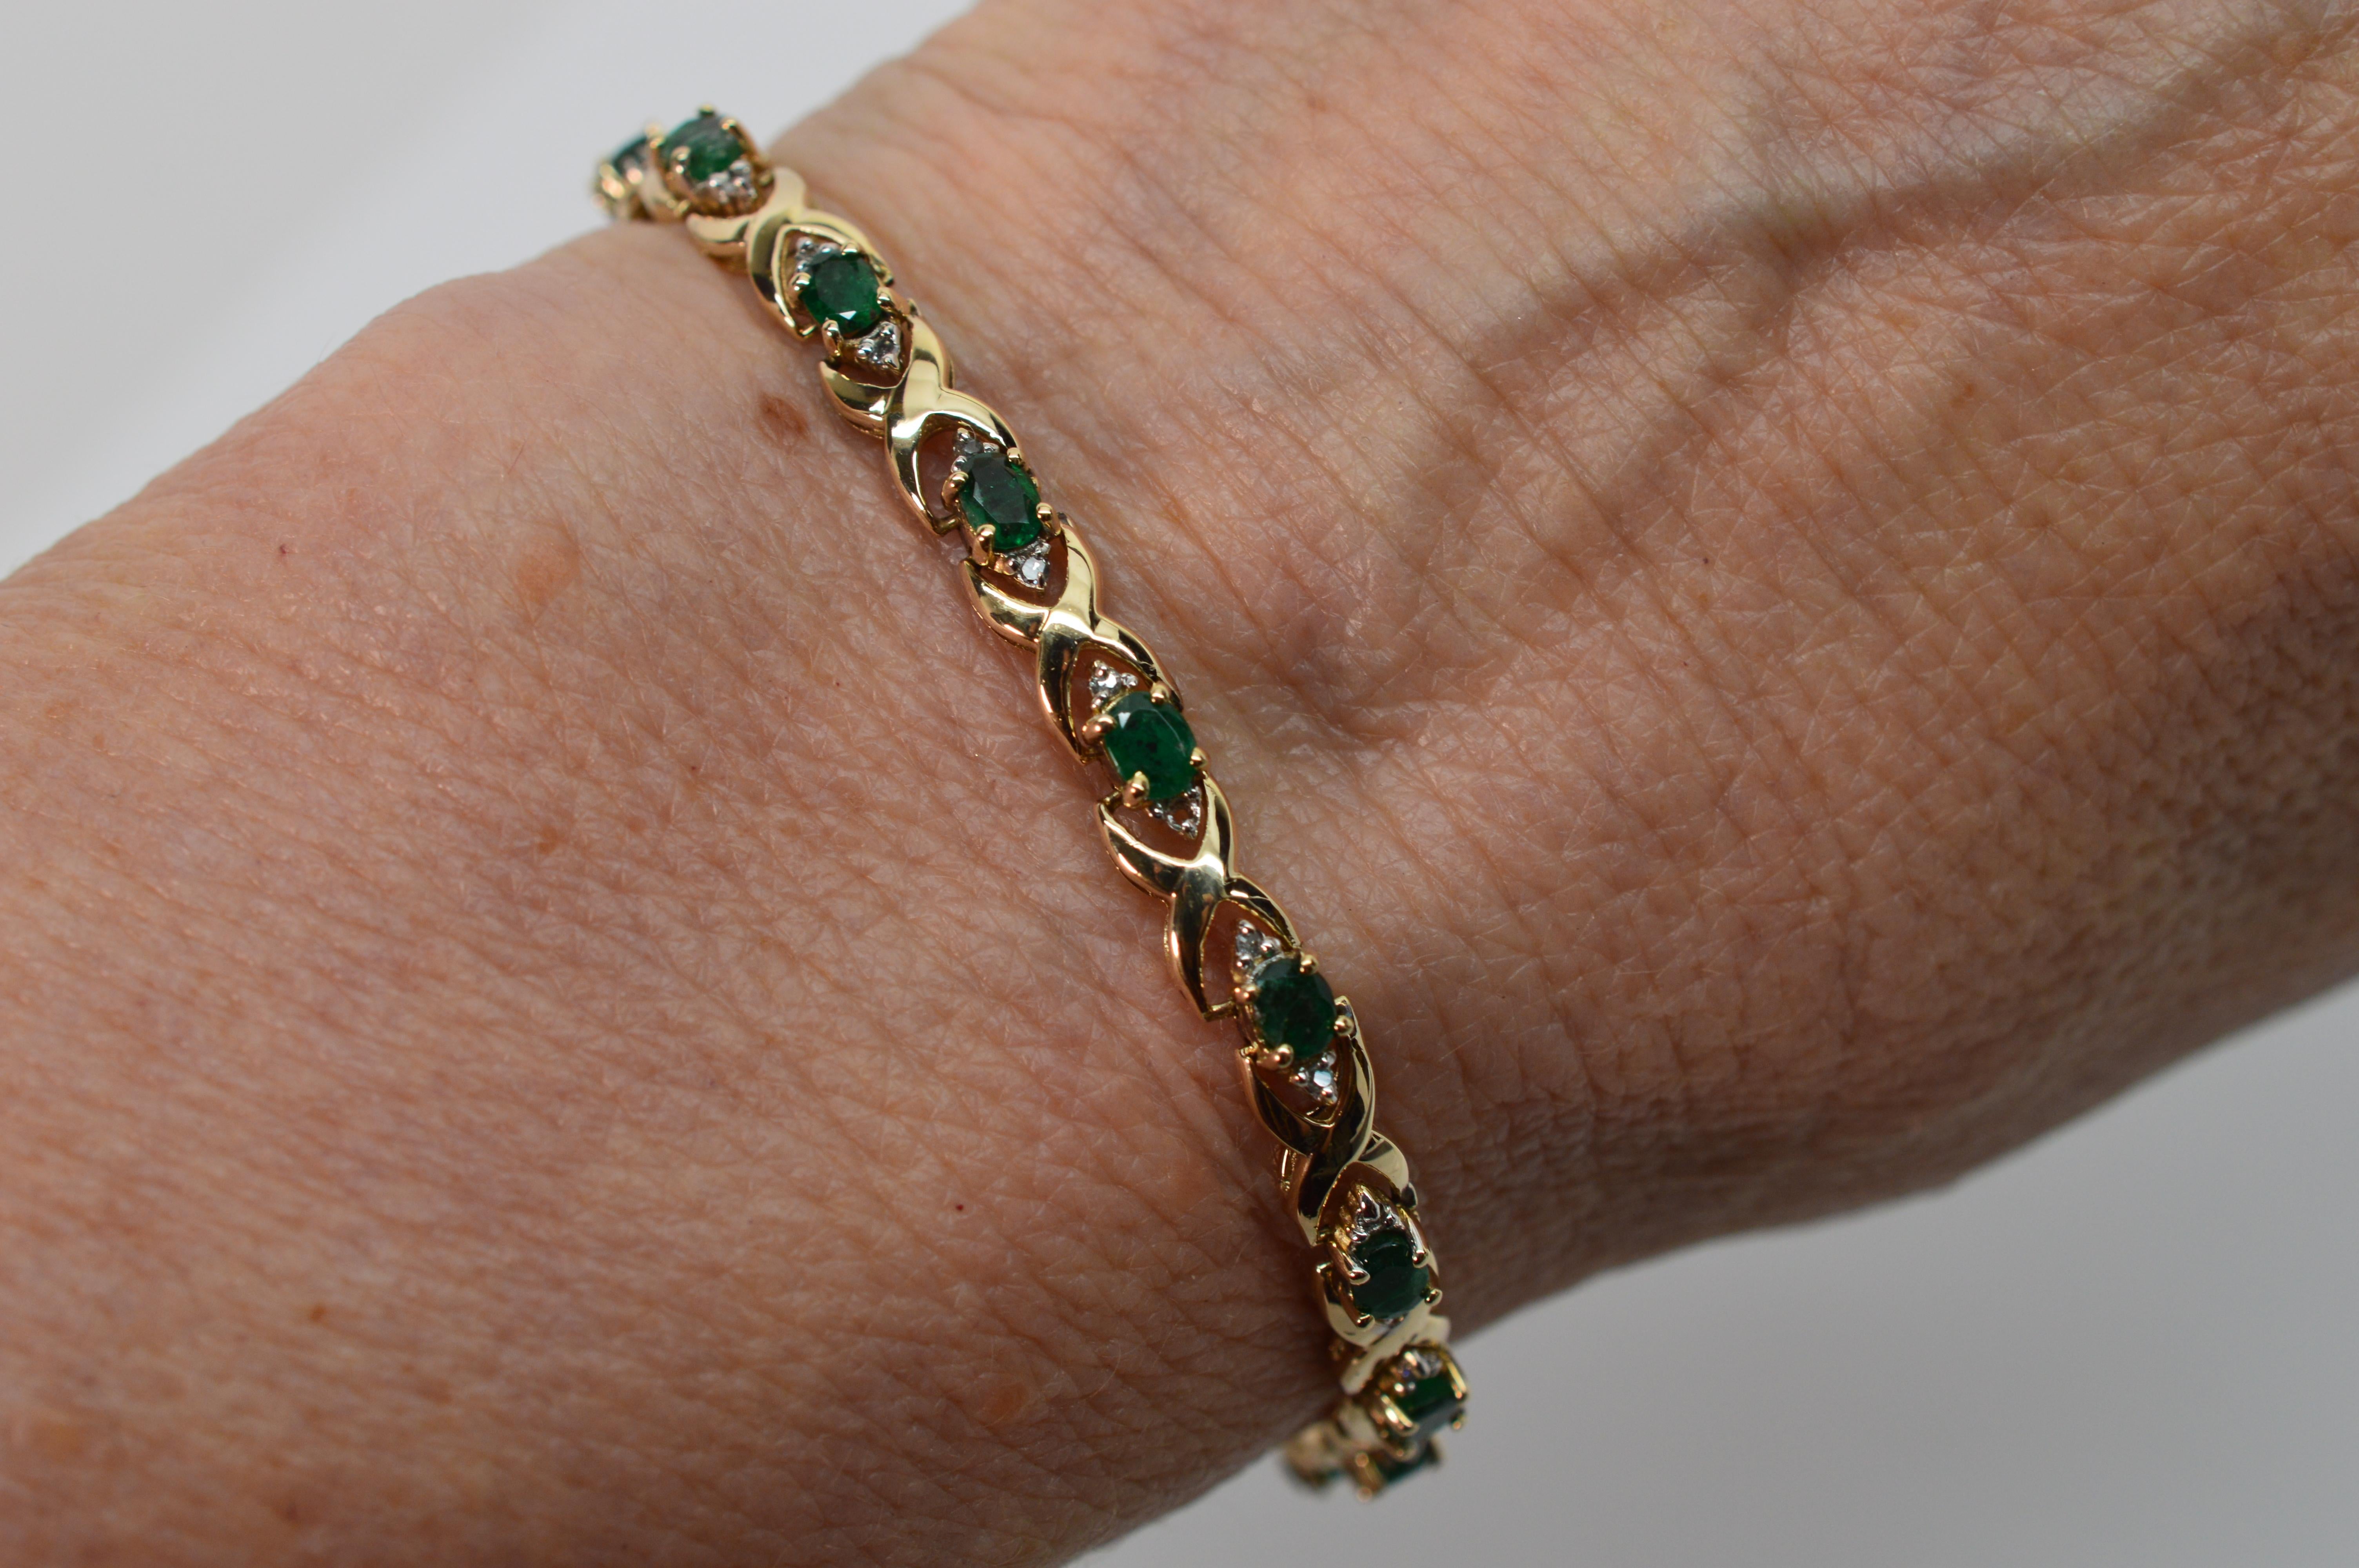 Vibrant facet cut oval emerald gemstones are accented with petite diamonds along this seven inch classic tennis bracelet of bright fourteen karat (14K) yellow gold. This slender gold links of this bracelet attractively highlights the depth of color